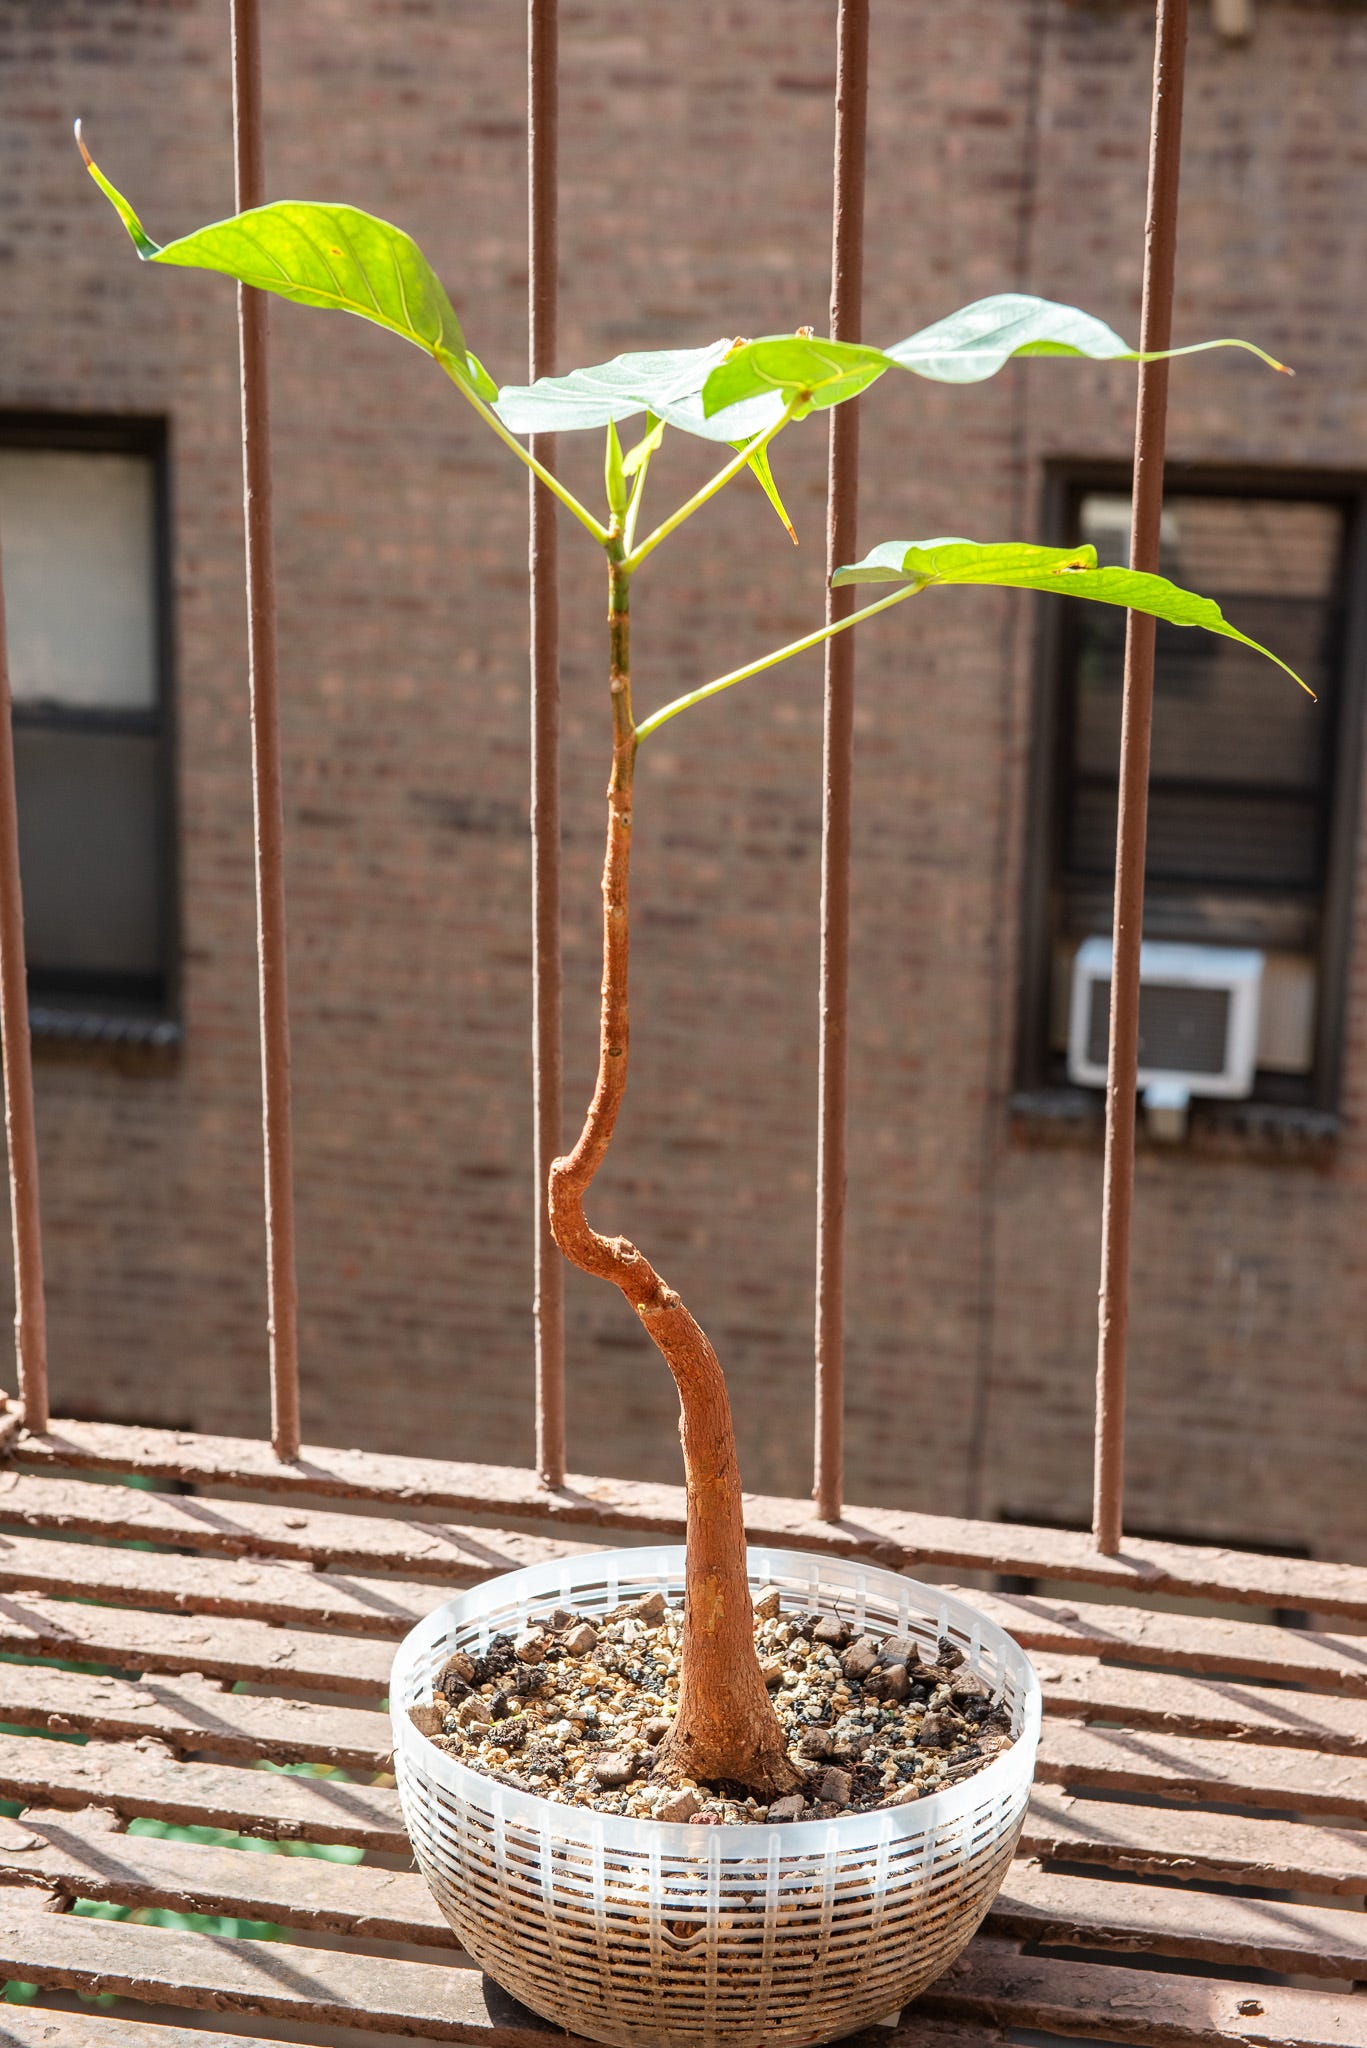 ID: Large religiosa planted in colander